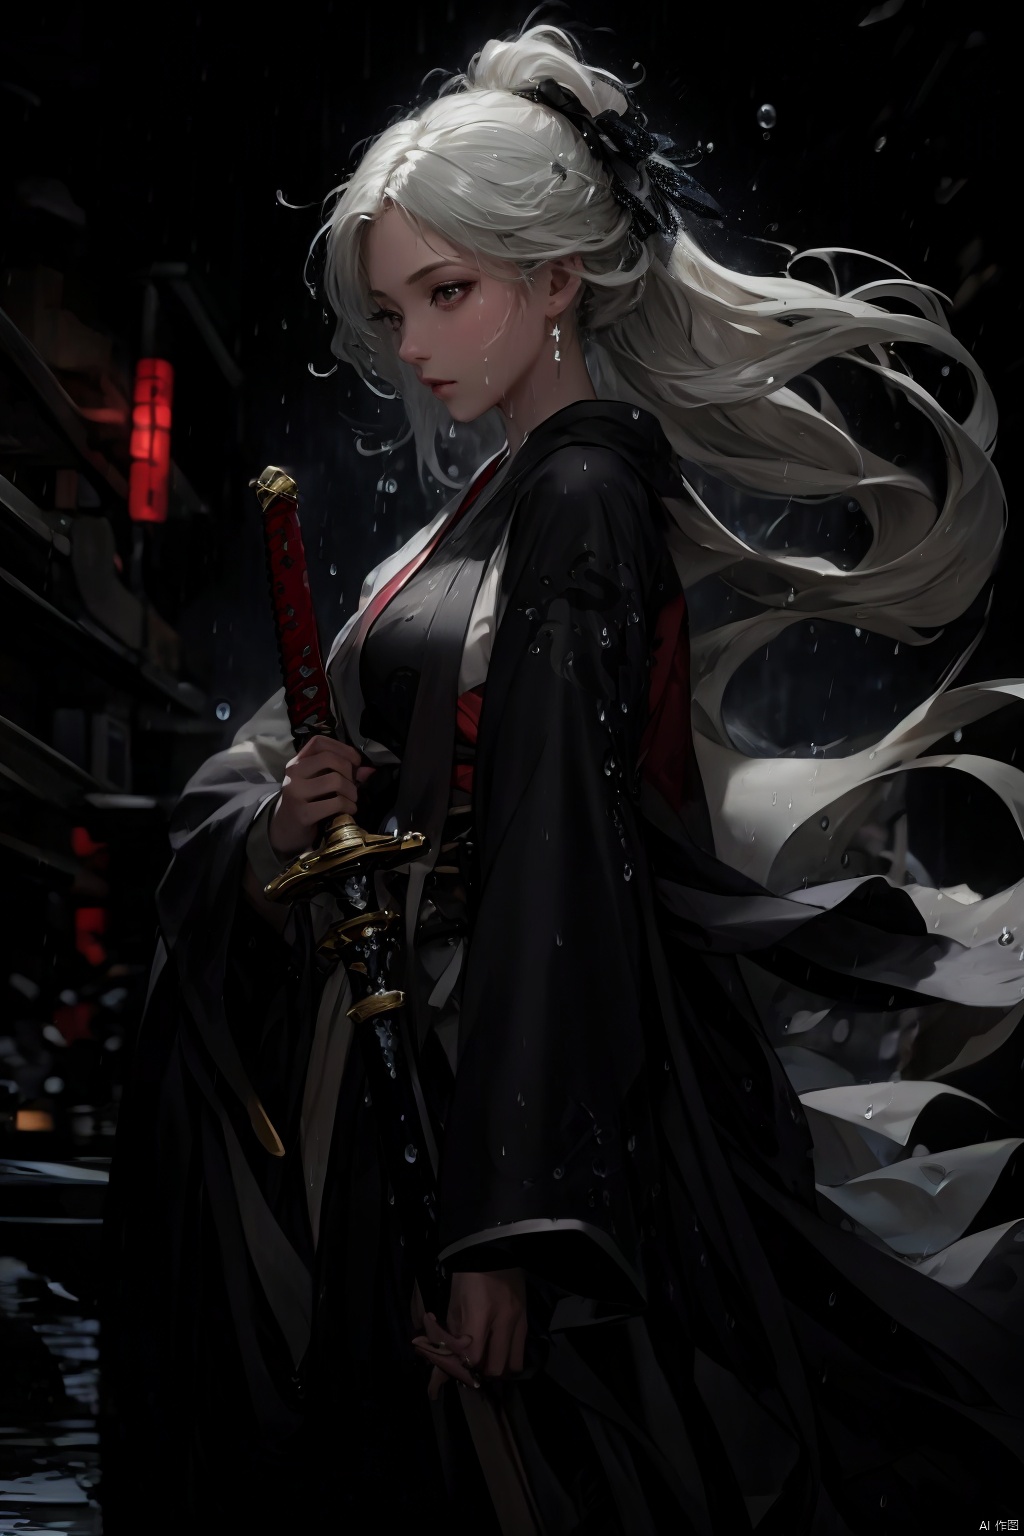 High detailed,  masterpiece,  A girl,  Half-body close-up,  solo,  female focus,  Gray hair: 1.35,  long hair,  ponytail,  （Black,  Hanfu|kimono）,  Suspended water waves: 1.5,  Water Droplet Splash: 1.2,  (In the rain: 1.5),  /（Suspension: 1.3),  /,  BREAK,  Handheld: 1.31/(swords.),  Blade,  / Sword hilt,  scabbard,  Depodh) /,  special effects,  holographic display,  fine gloss,  full length shot,  Oil painting texture,  (Black Background: 1.3),  3D,  Futurism,  ray tracing,  reflection light,  anaglyph,  Surrealism,  motion blur,  cinematic lighting,  motion lines,  Depth of field,  ray tracing,  sparkle,  UHD,  8K,  best quality,  textured skin,  1080P,  ccurate,  lamer,  splash water,<lora:EMS-278642-EMS:0.300000>